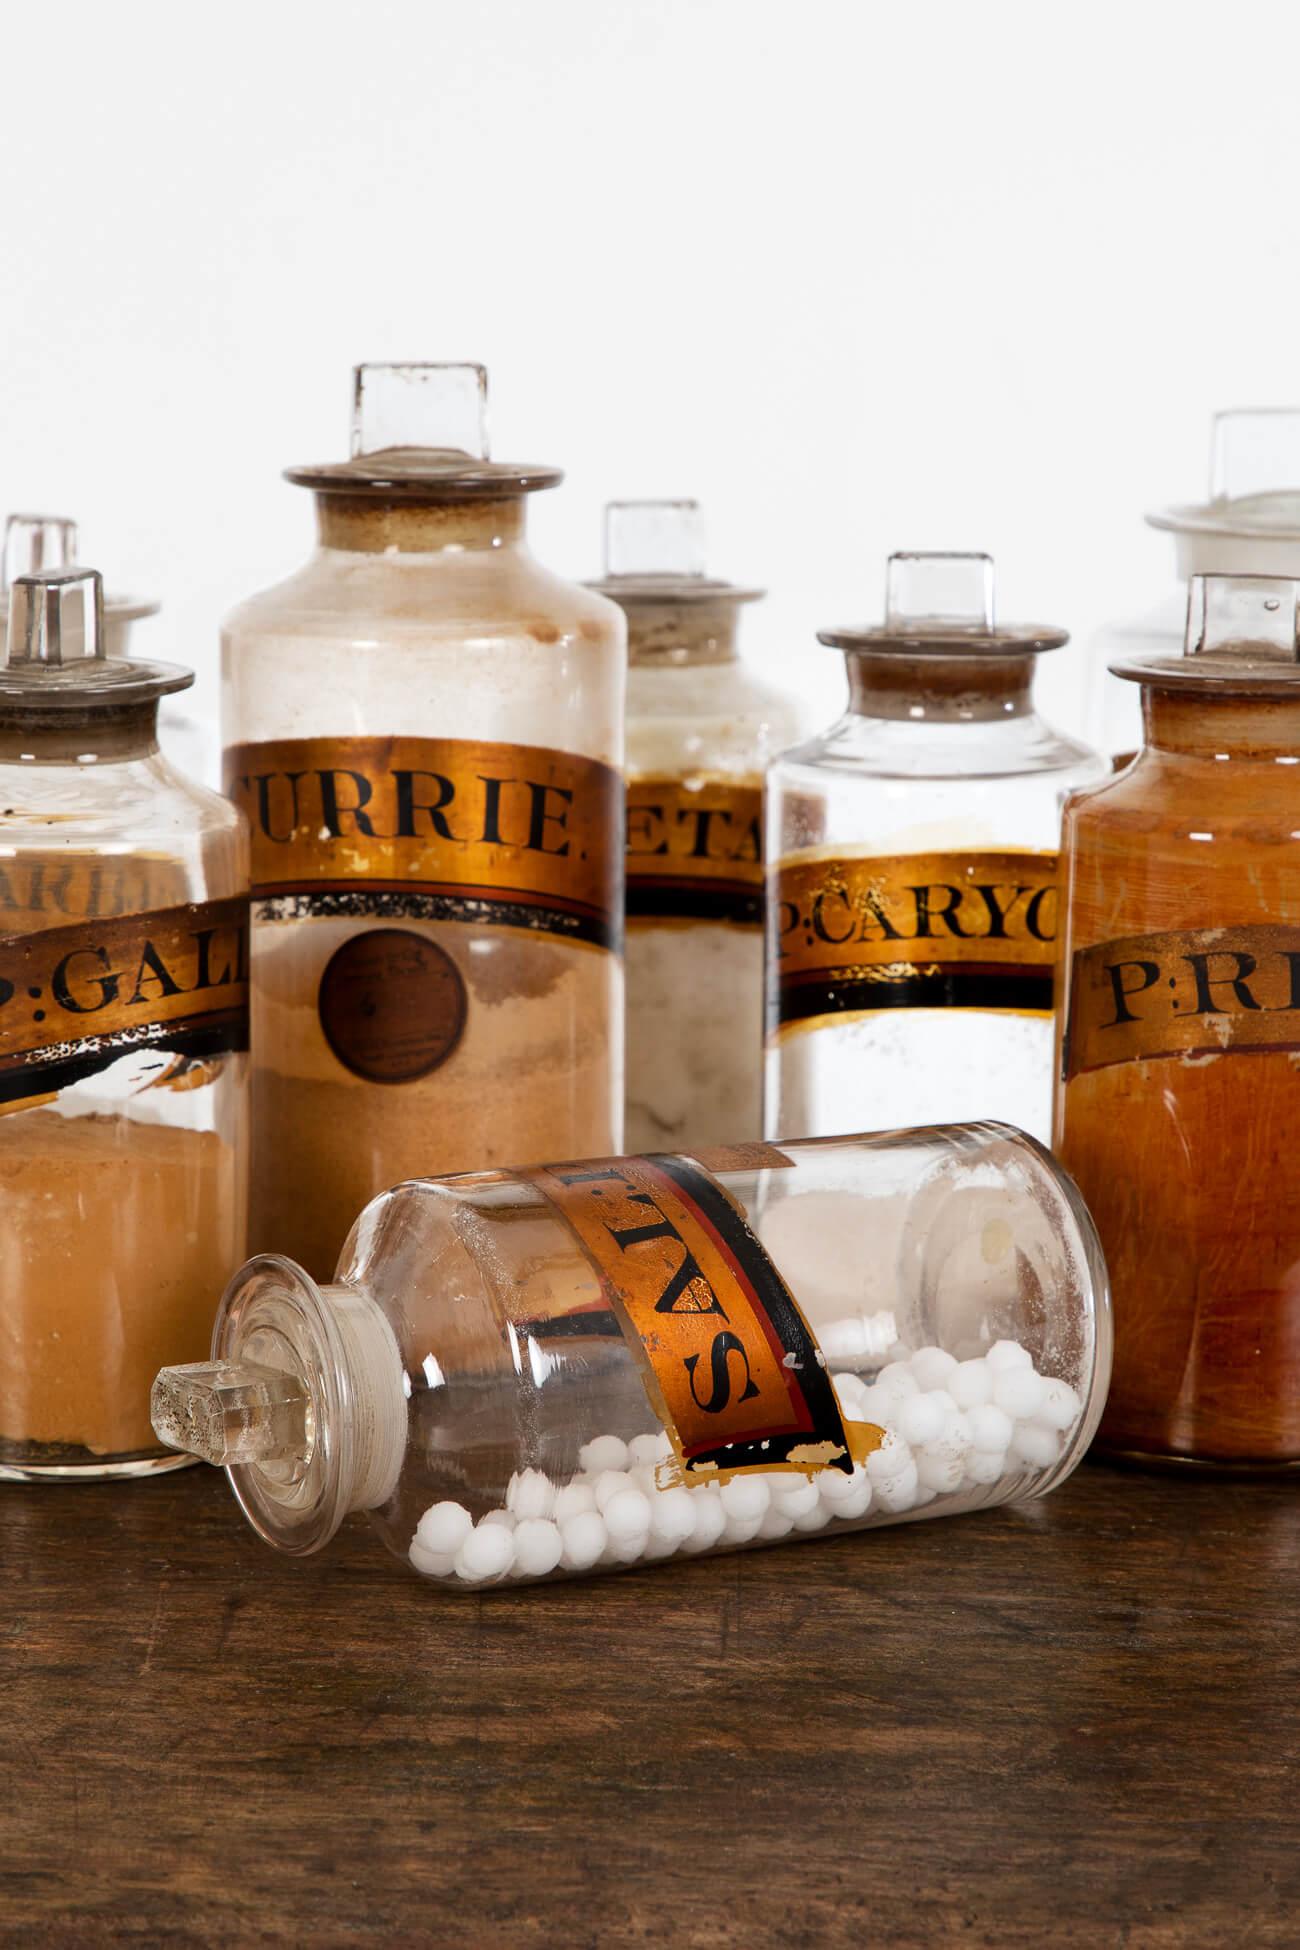 British Georgian apothecary bottles For Sale